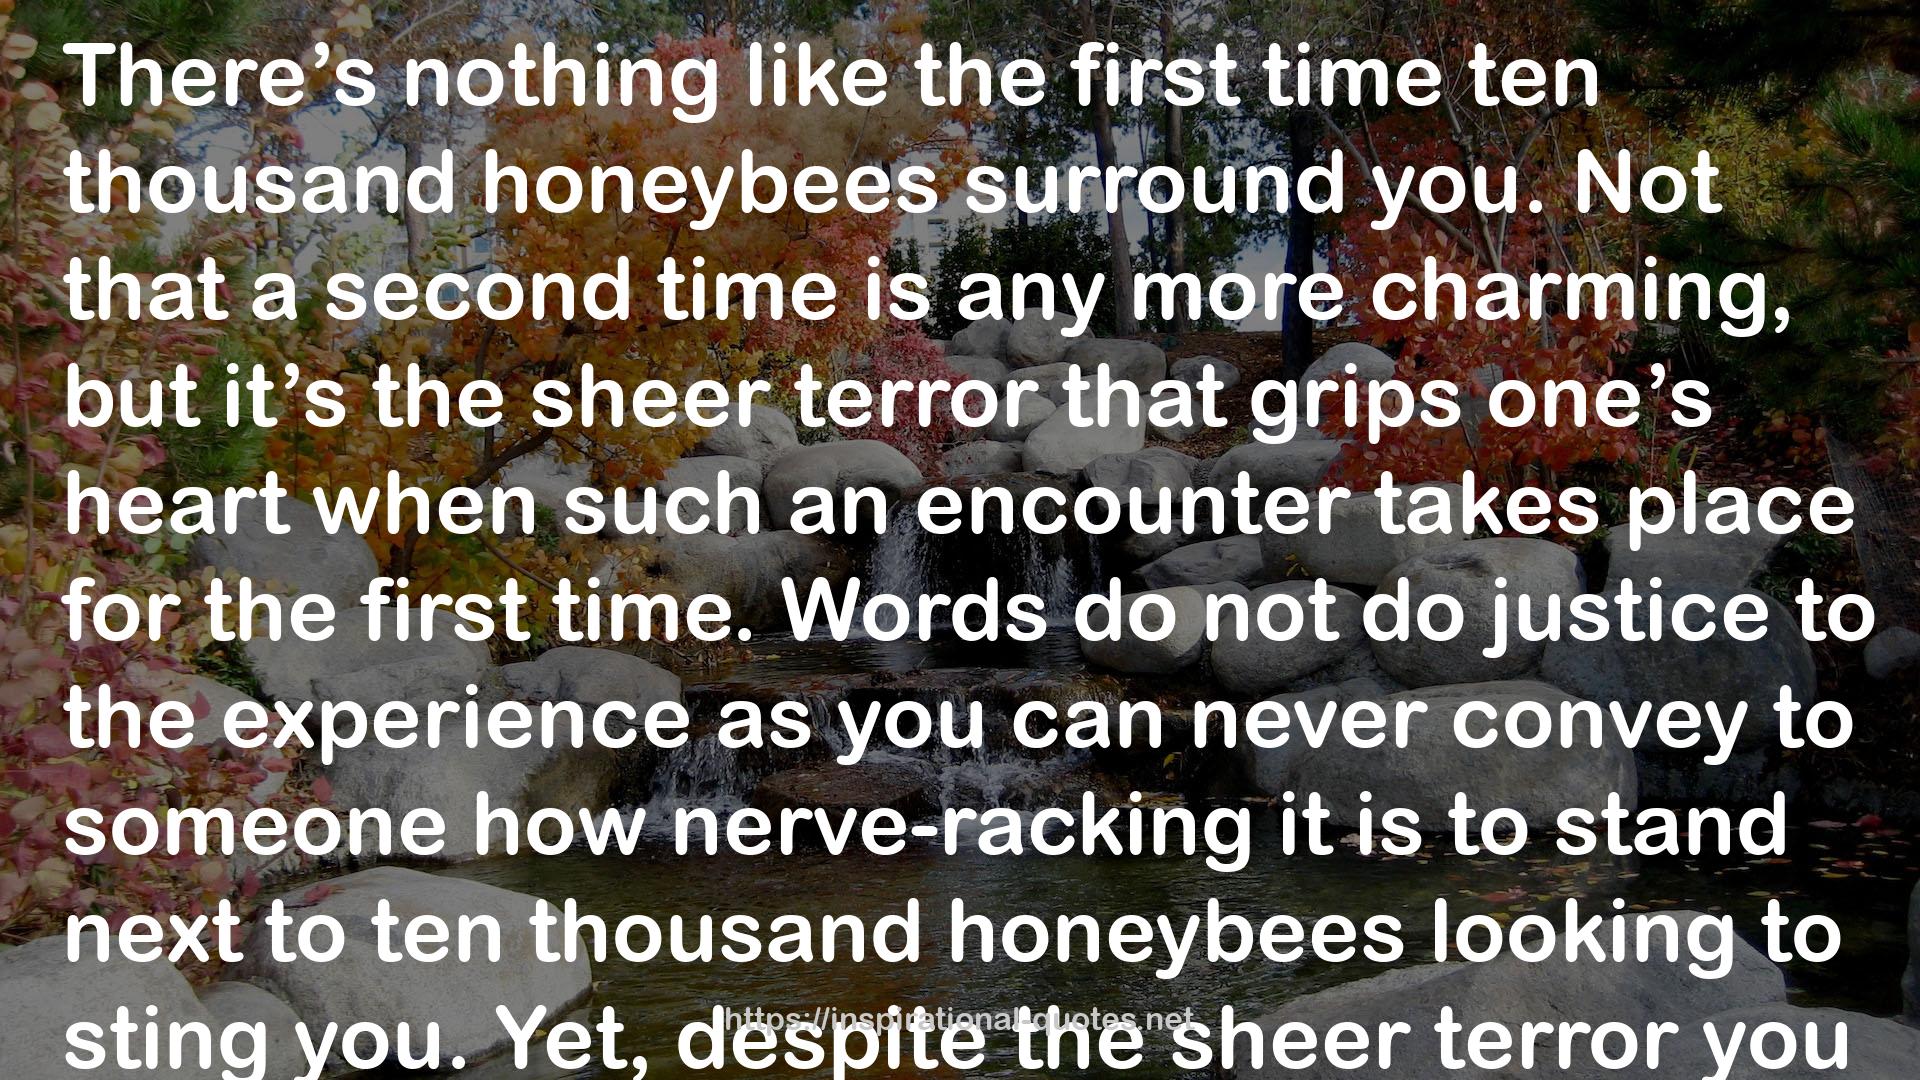 Bee Focused: What Honeybees Can Teach Us About Change, Crisis, and Communication QUOTES